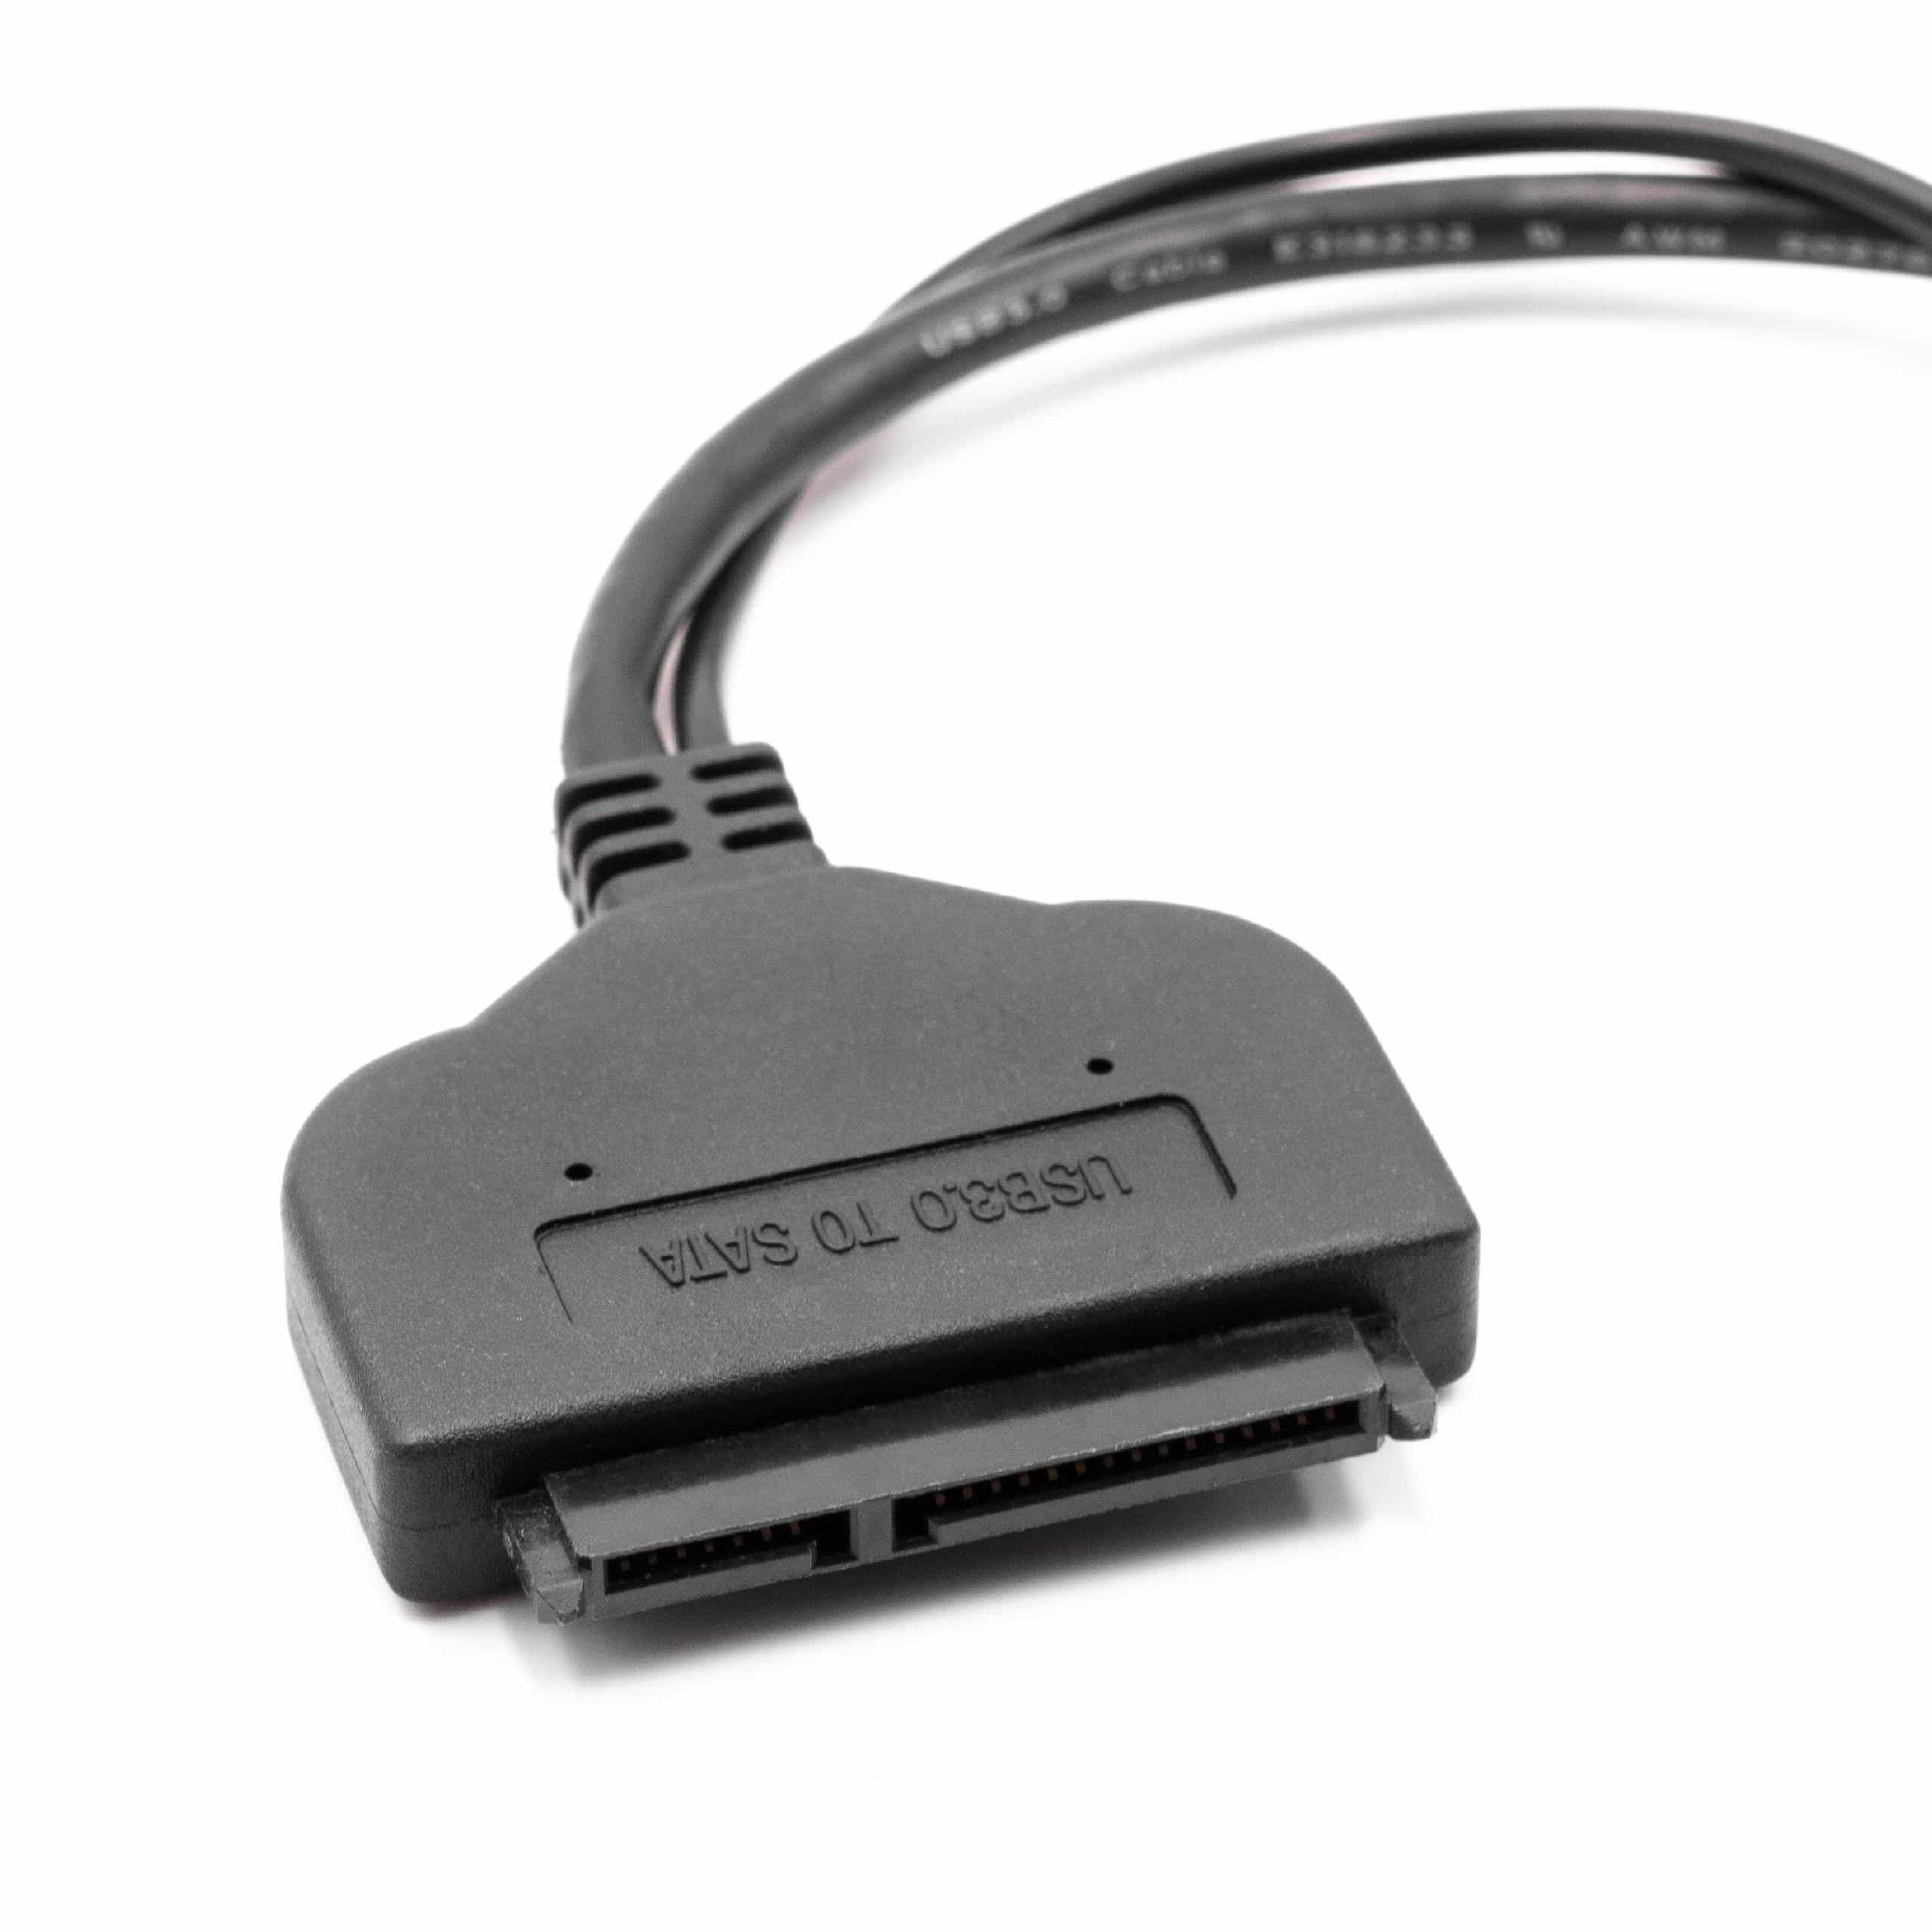 SATA III to USB 3.0 External Hard Drive Adapter Cable for HDD, SSD External Hard Drives, Plug-and-Play black